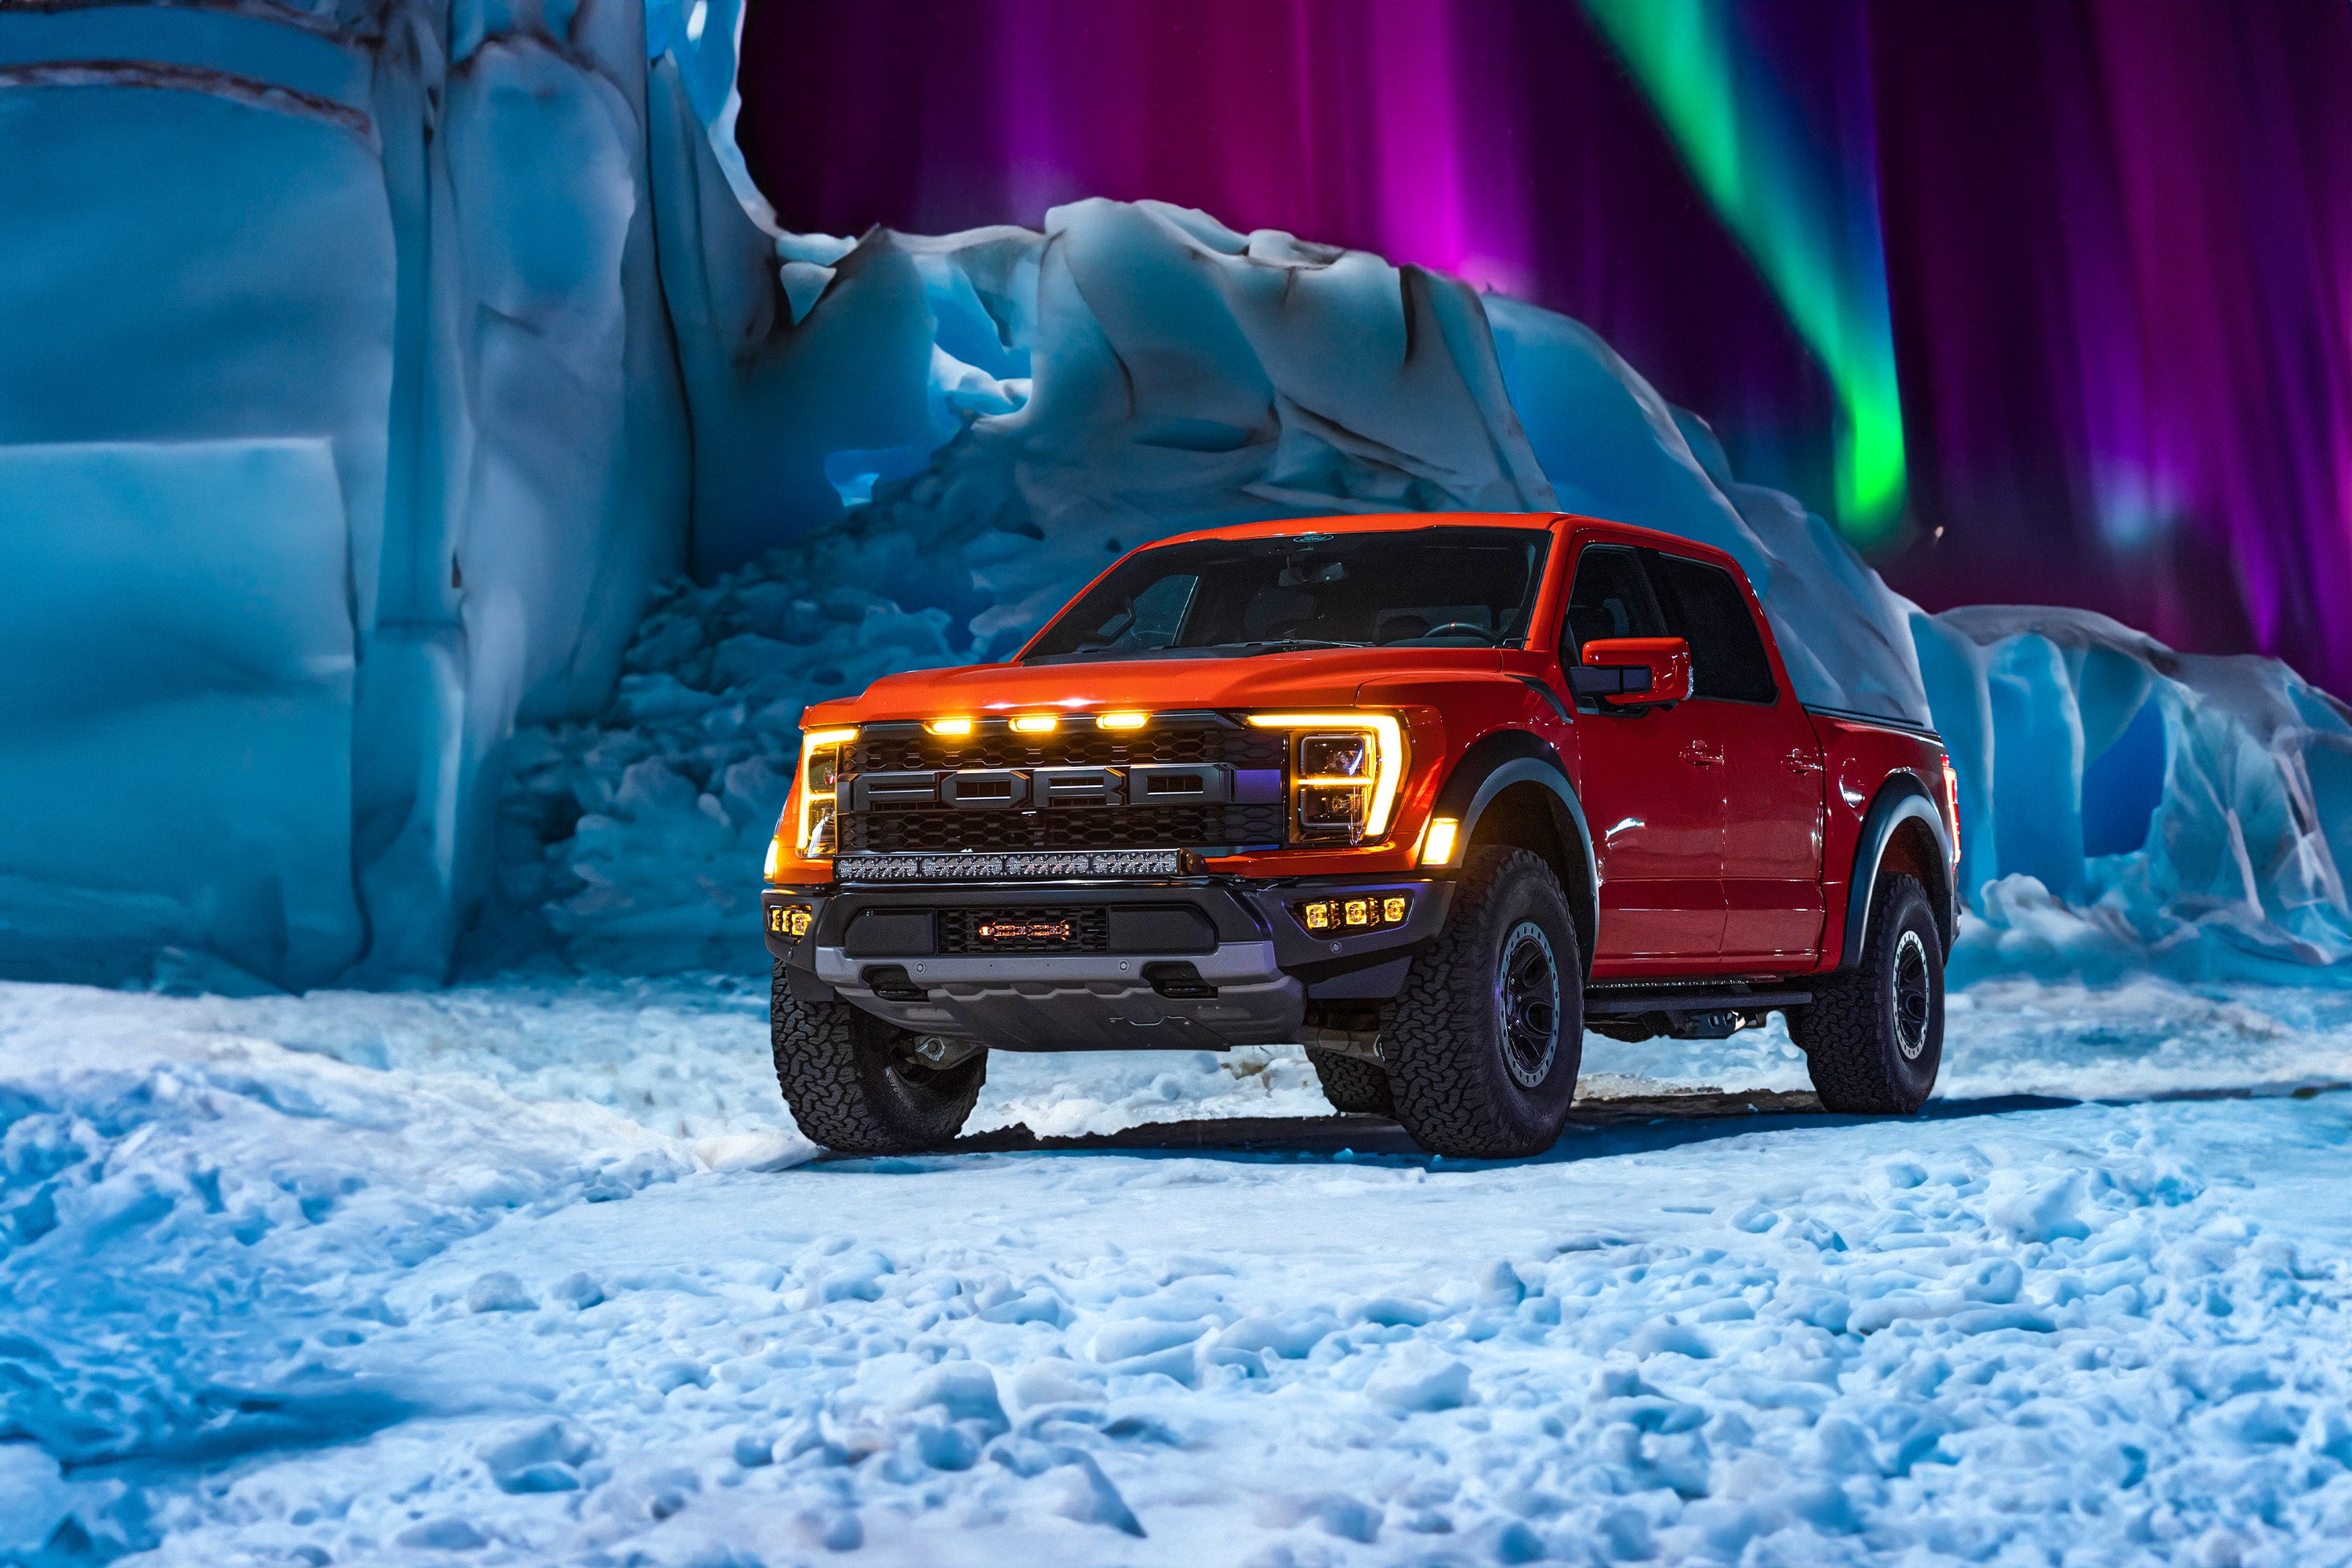 Why It’s Worth Getting a Light Kit for Your Ford F-150